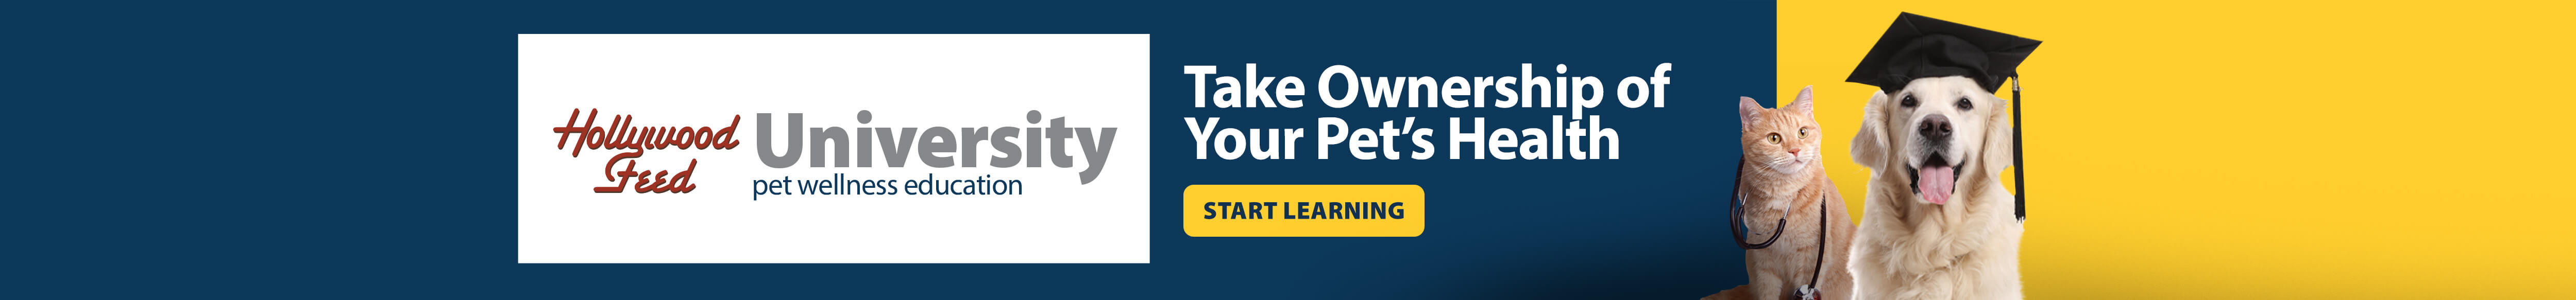 Hollywood Feed University - Take Ownership of your pet's health. click to start learning